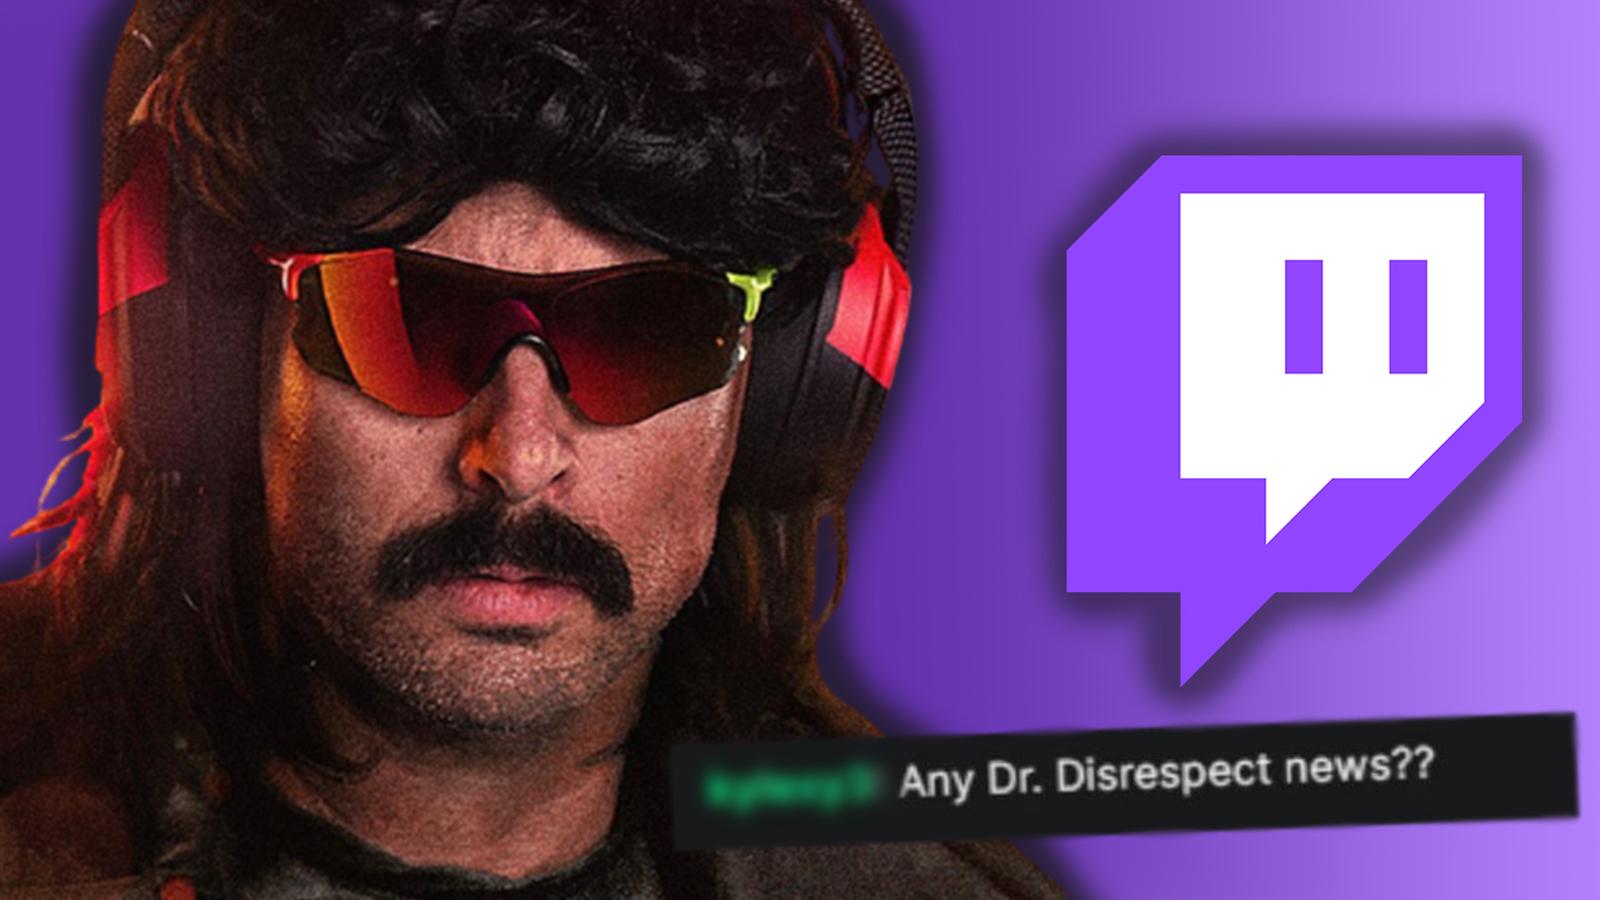 Twitch responds to Dr Disrespect ban question